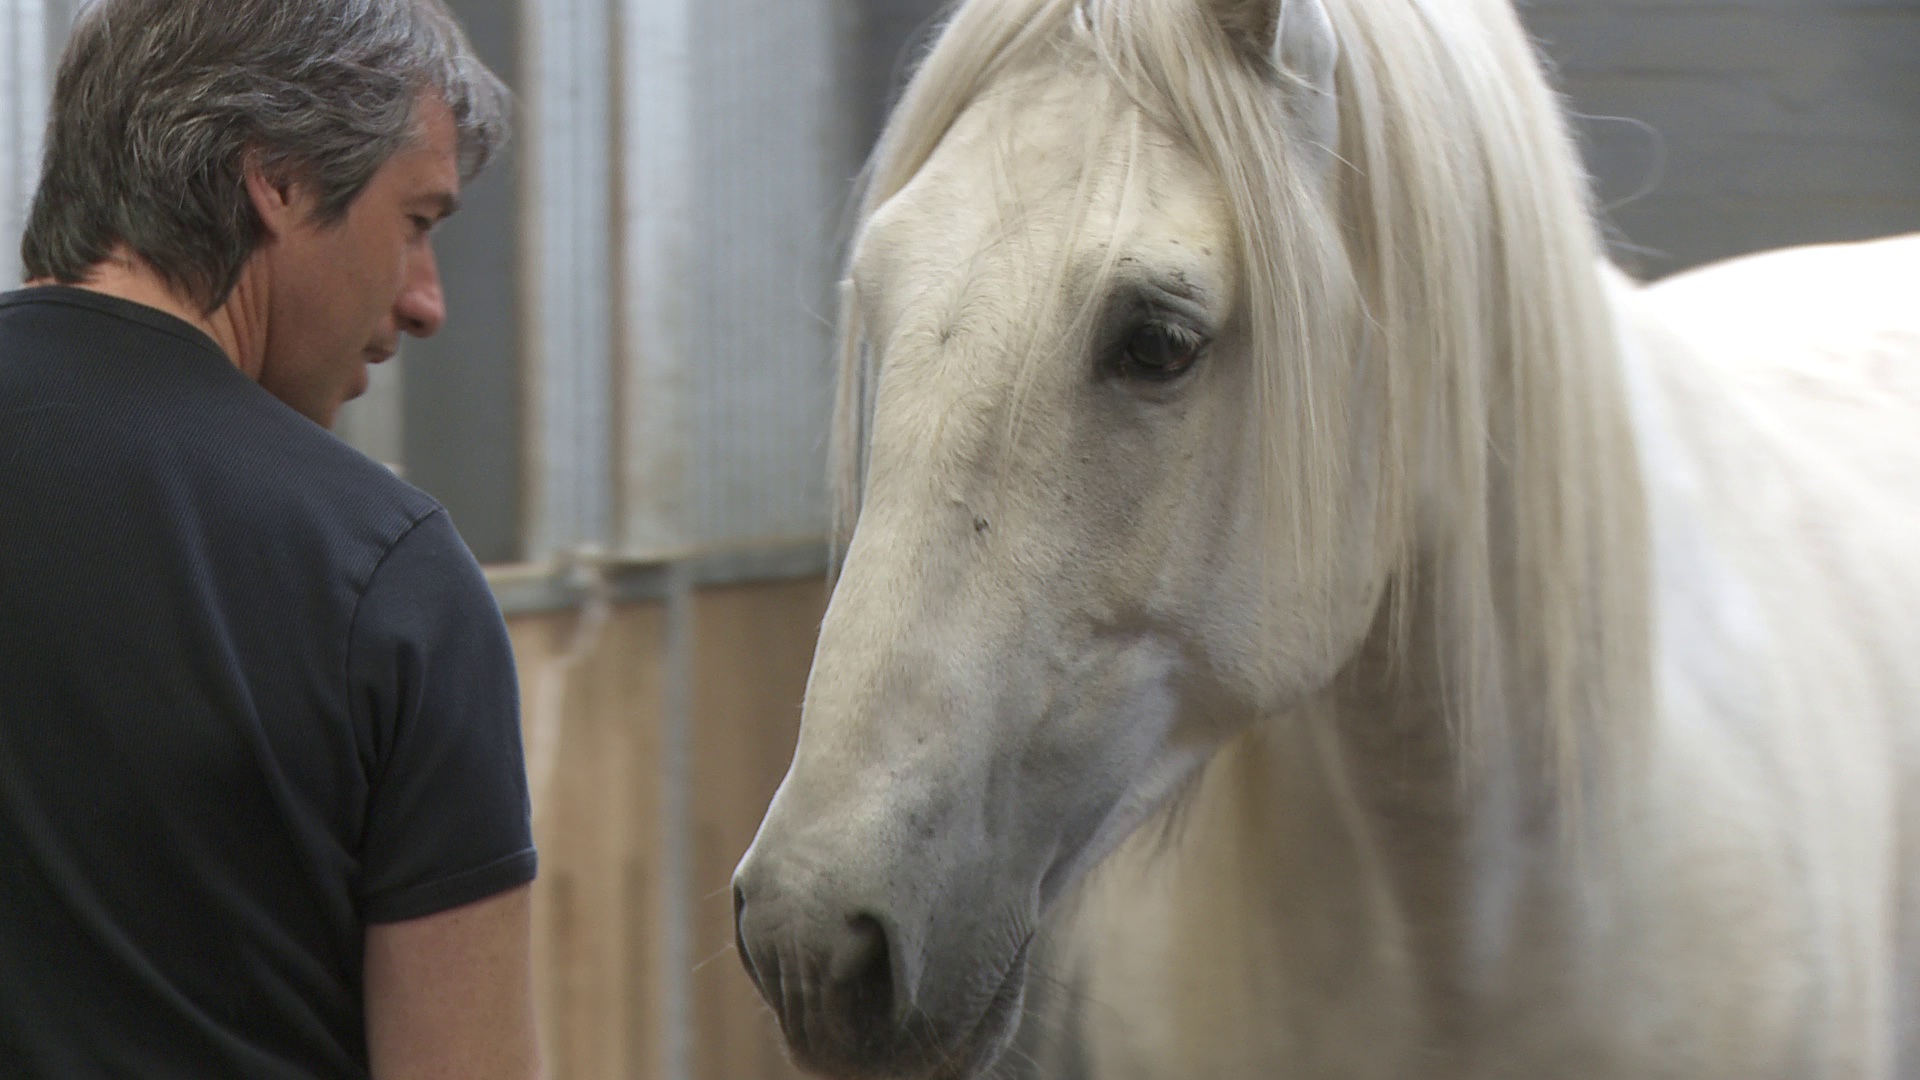 Jean-François Pignon communicates with his Stallion which is concentrated on Pignon despite various mares nearby the stallion. (Excerpt from Jolanda Ellenberger's documentary: 